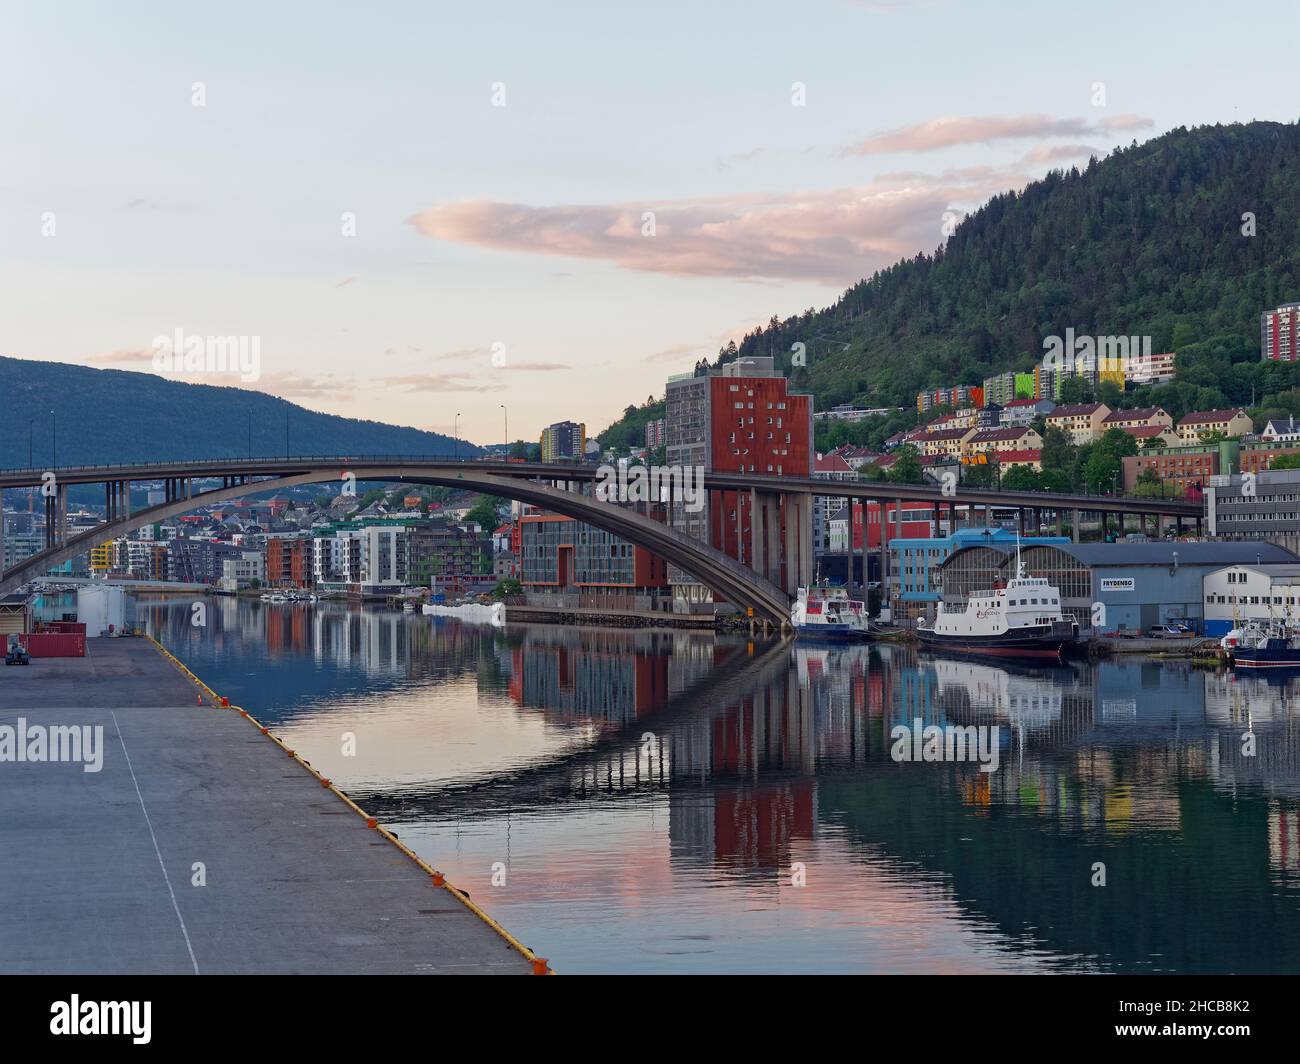 Looking through the arched road bridge and into Bergen City Centre at Dawn from the Quayside with Boats moored alongside on the calm water. Stock Photo